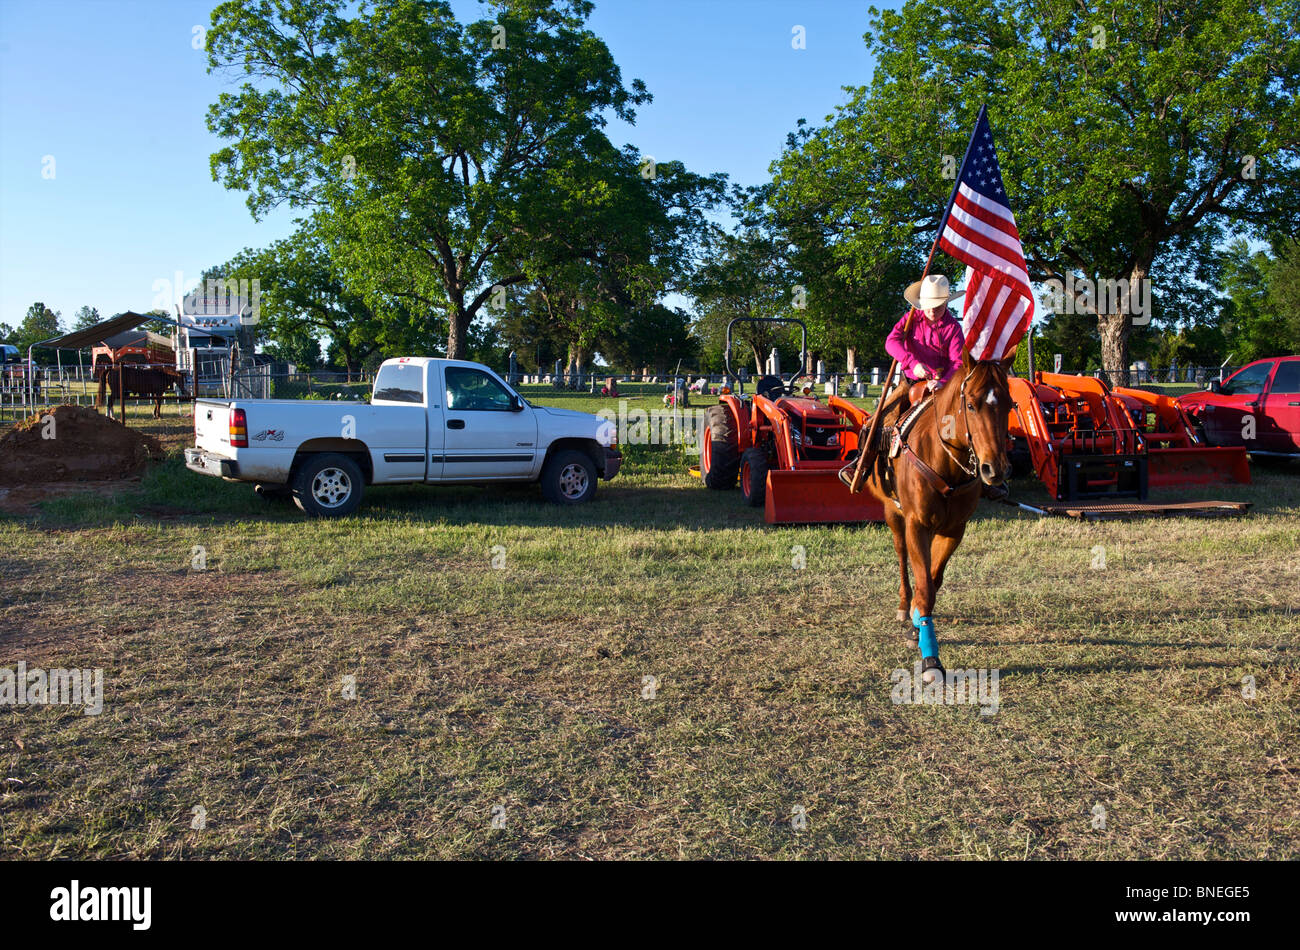 Cowgirl  waving flag in stockyard before opening ceremony of PRCA rodeo event in Texas, USA Stock Photo